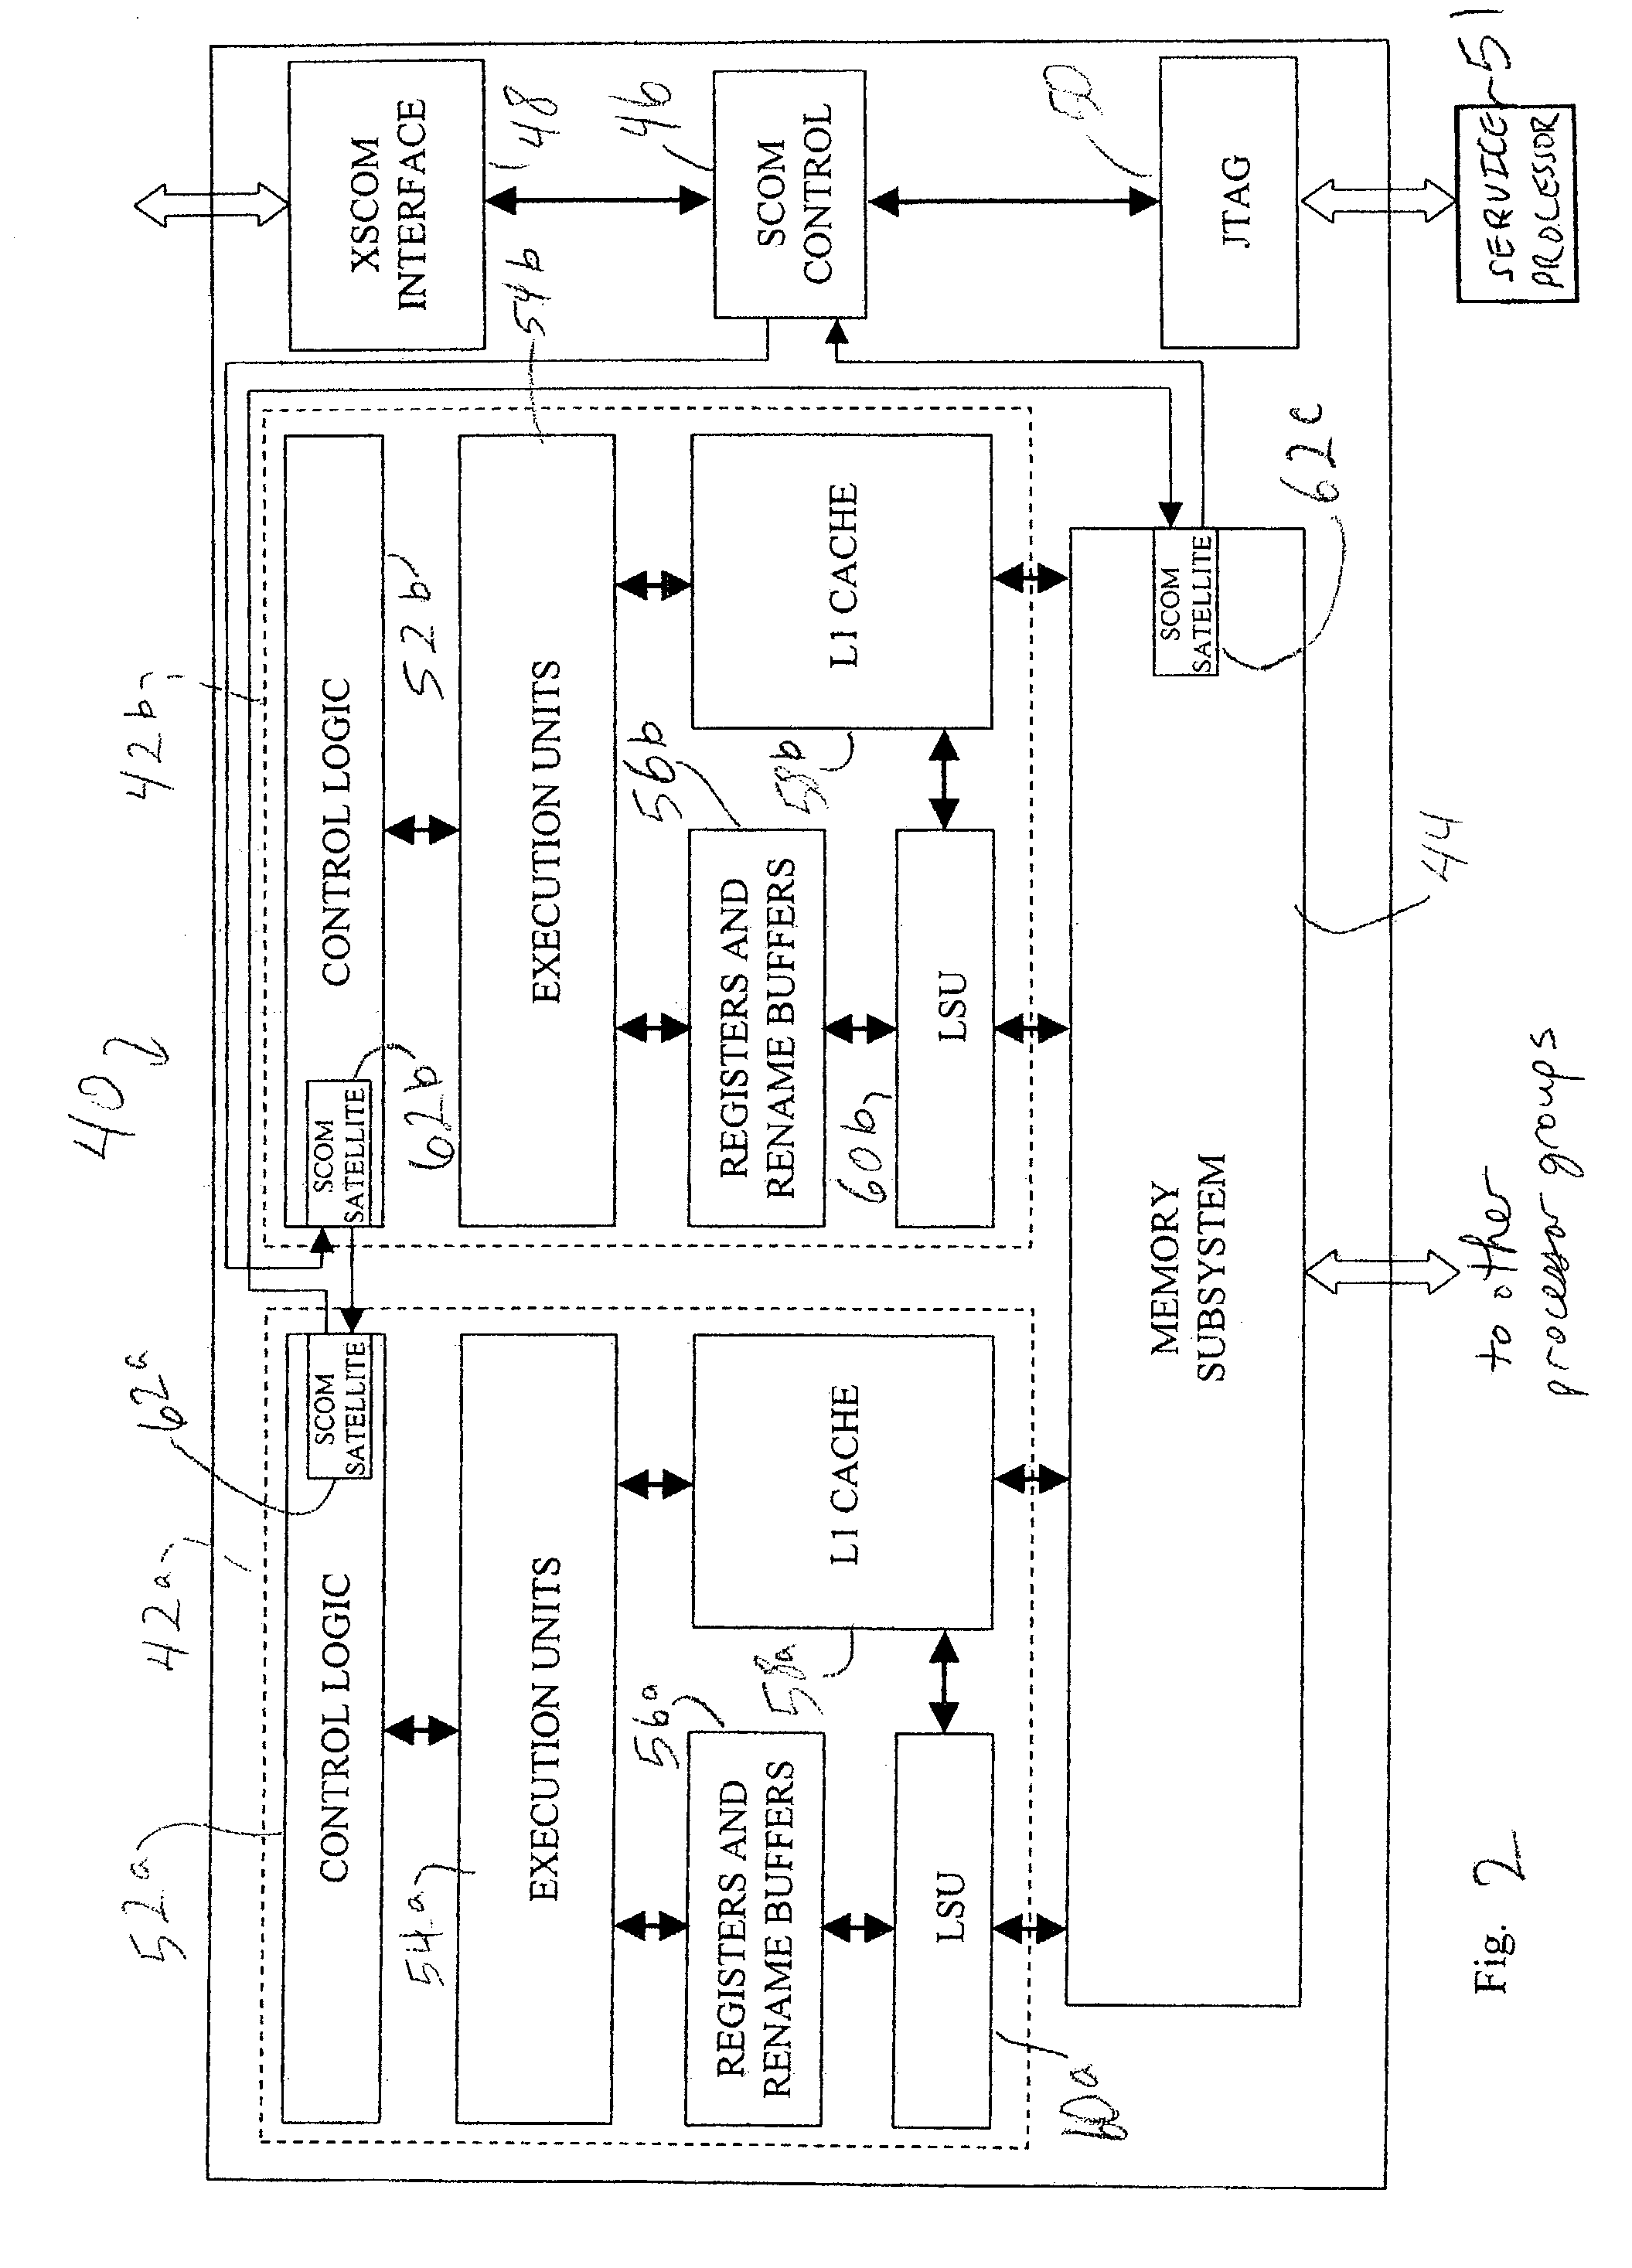 Cross-chip communication mechanism in distributed node topology